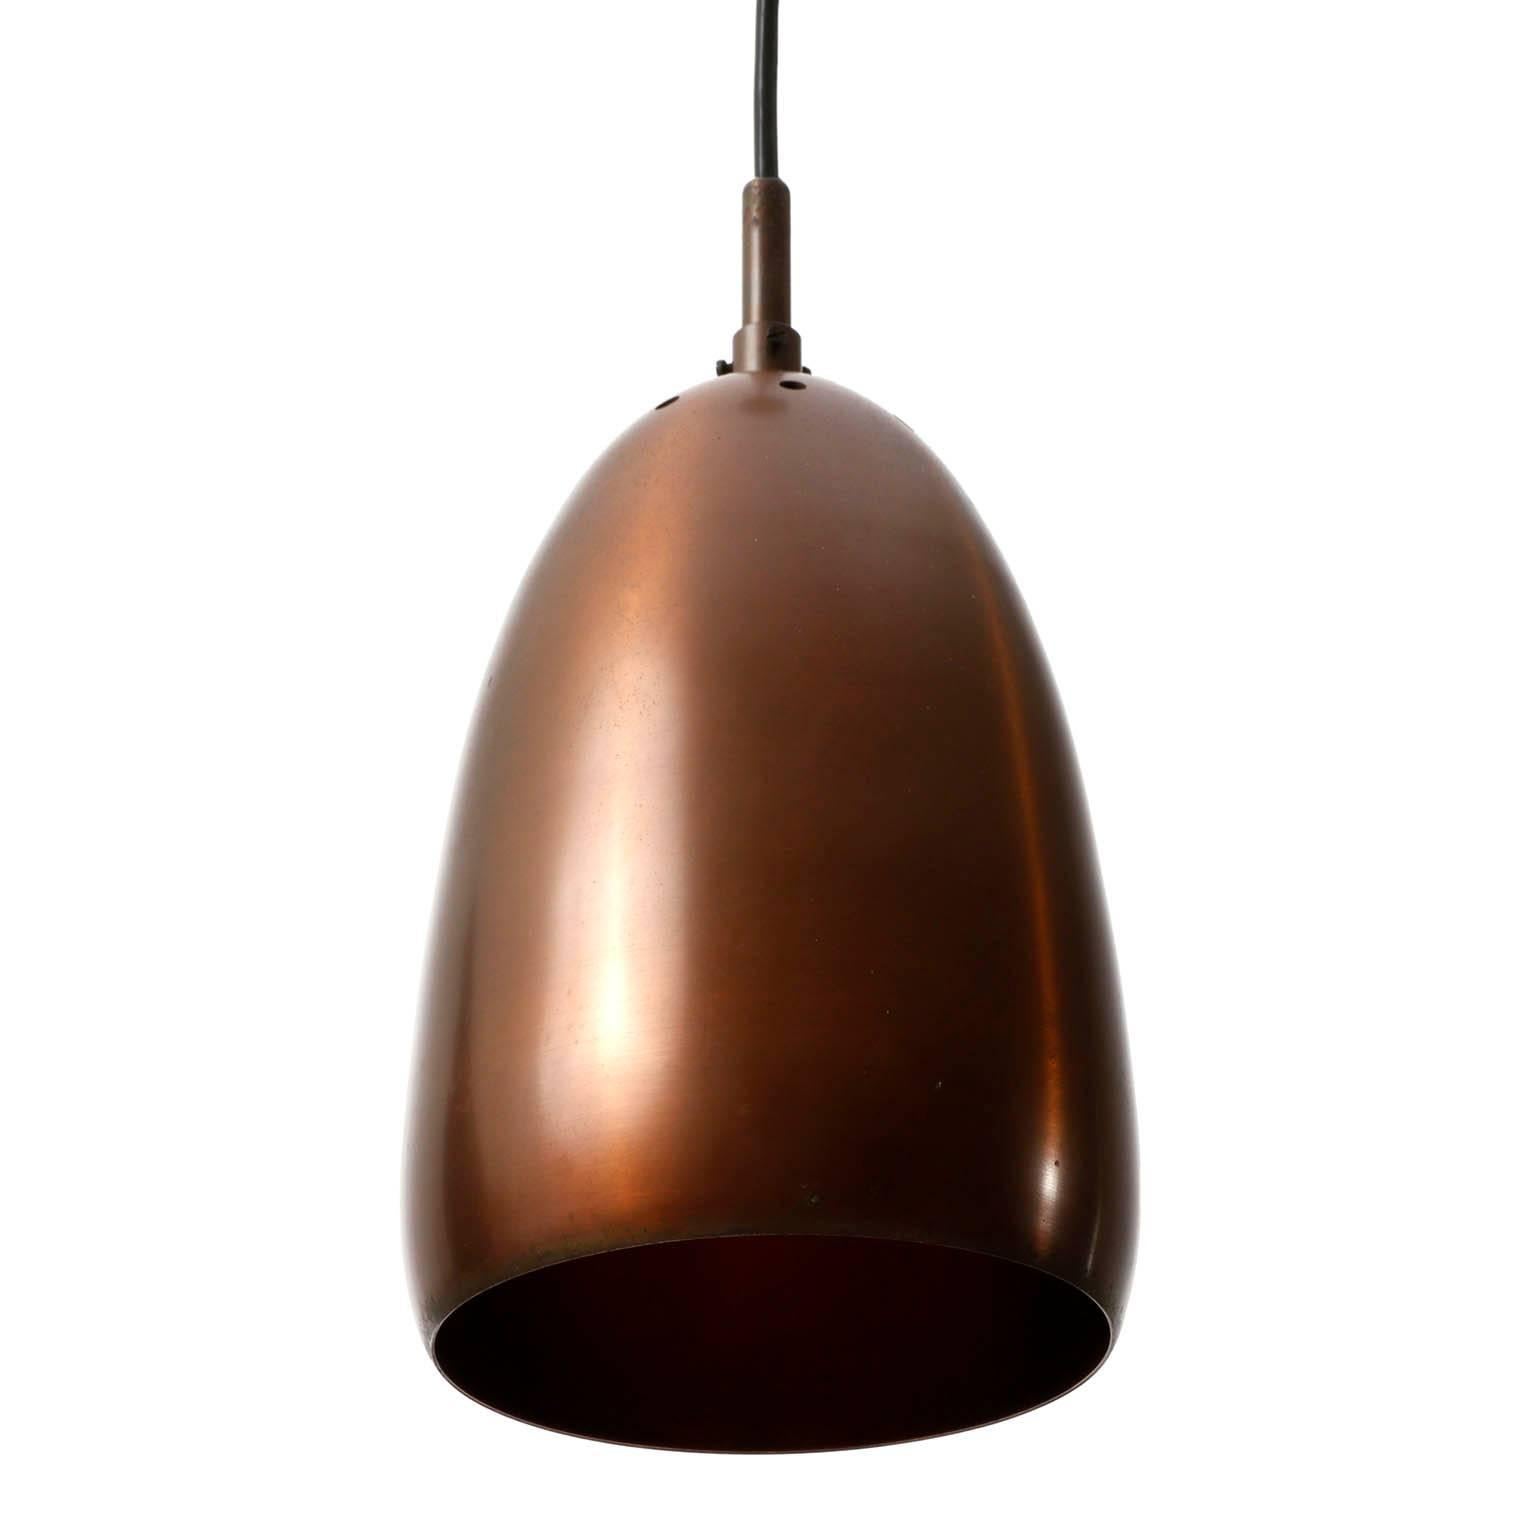 Italian One of Six Mid-Century Modern Patinated Copper Pendant Lights, 1960 For Sale